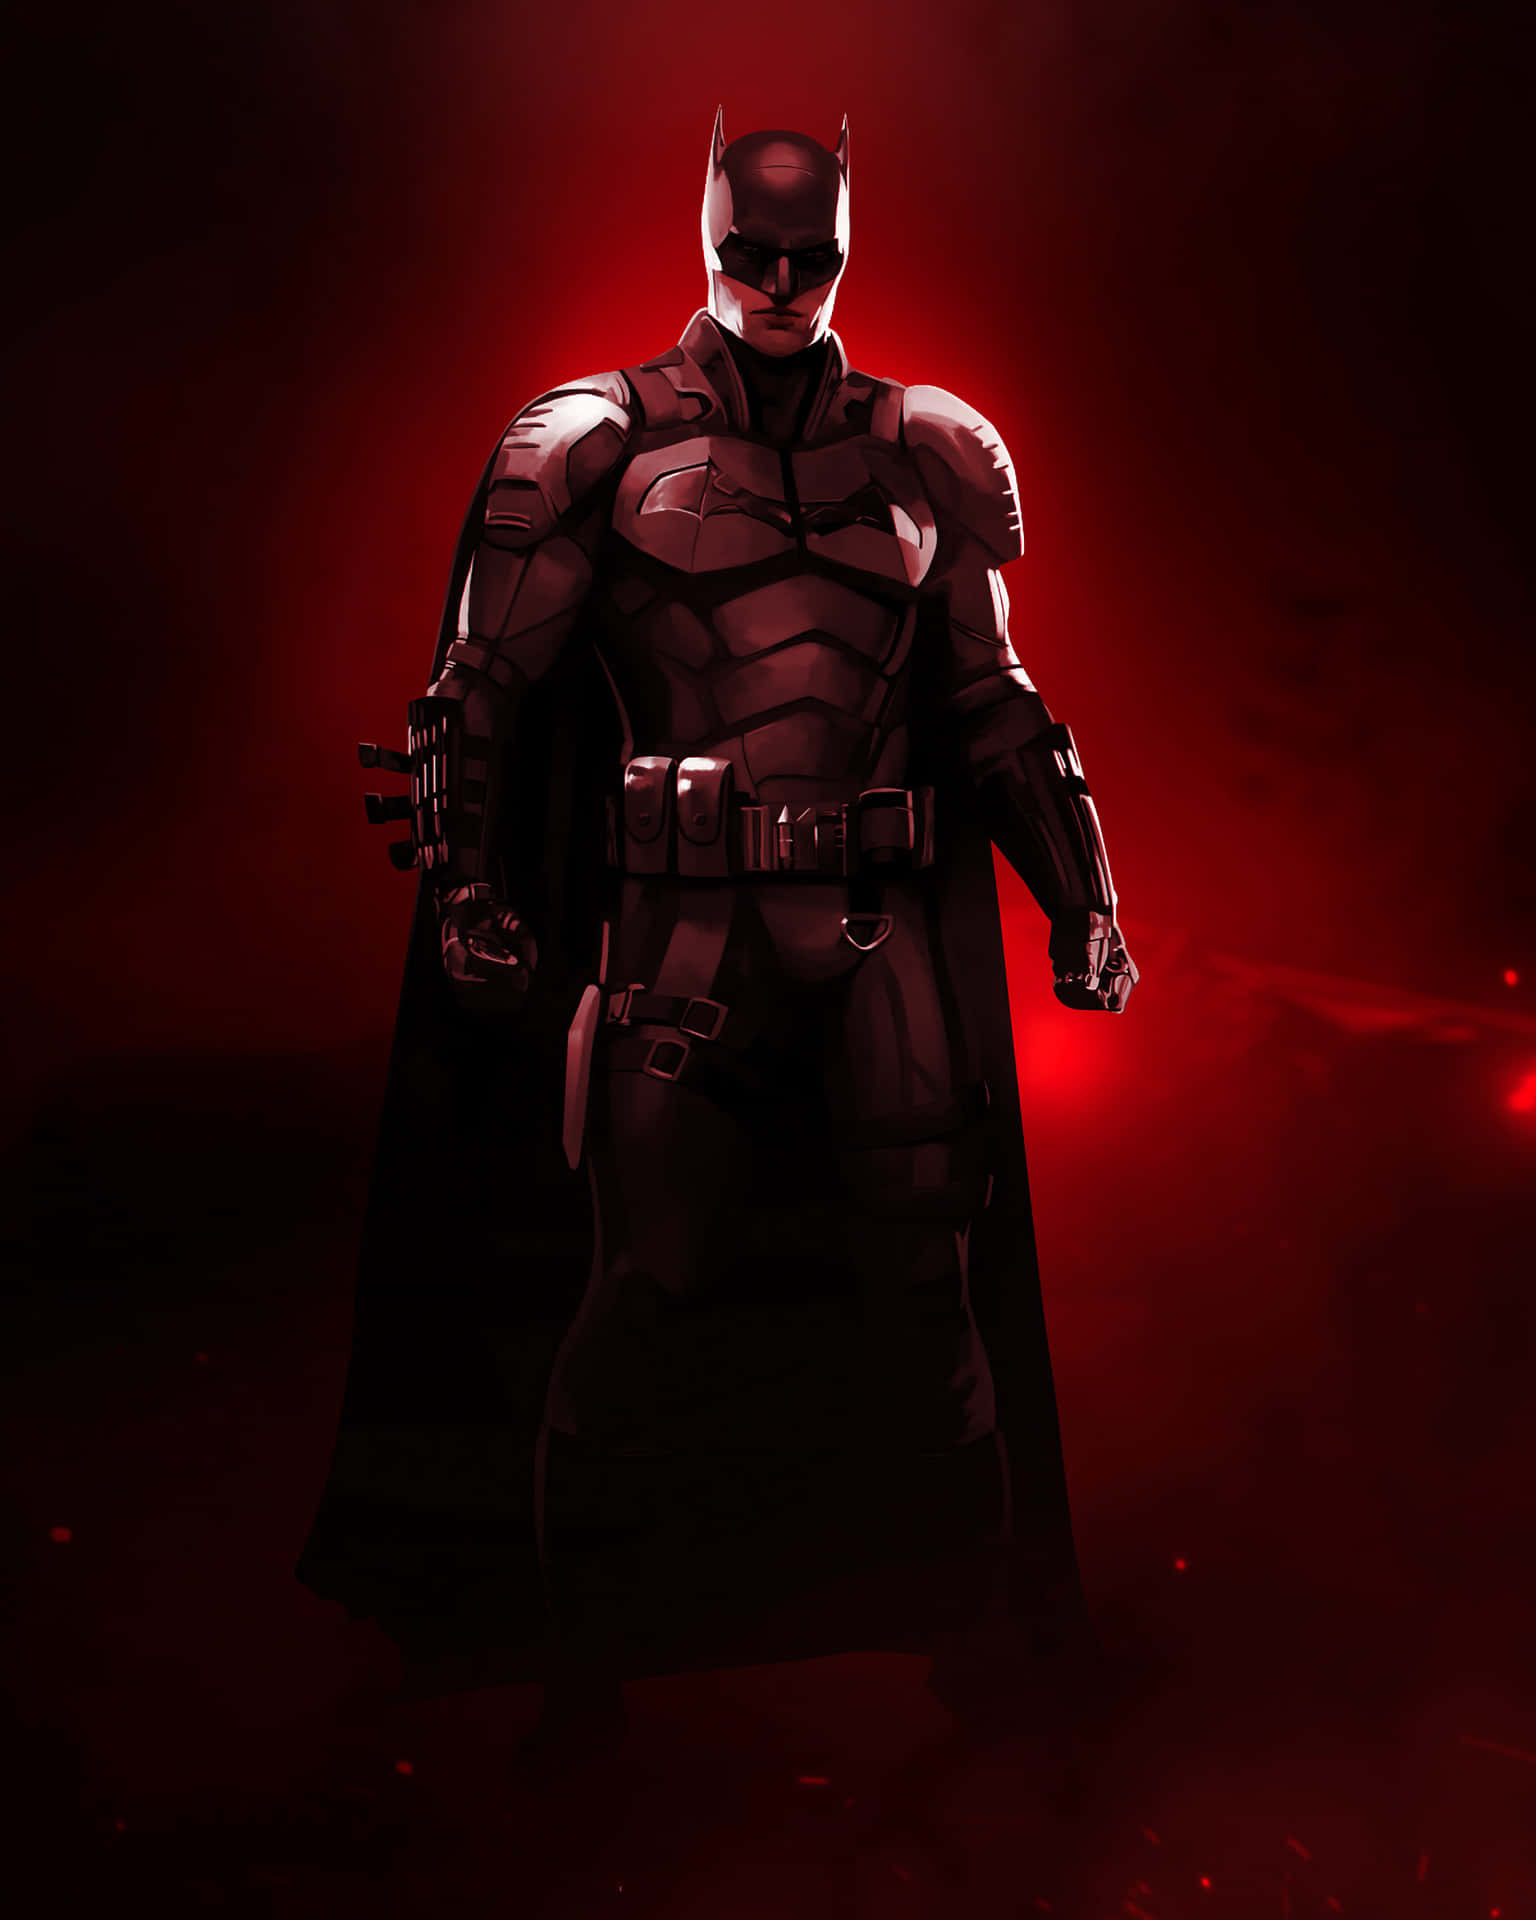 The Dark Knight To The Rescue! Background